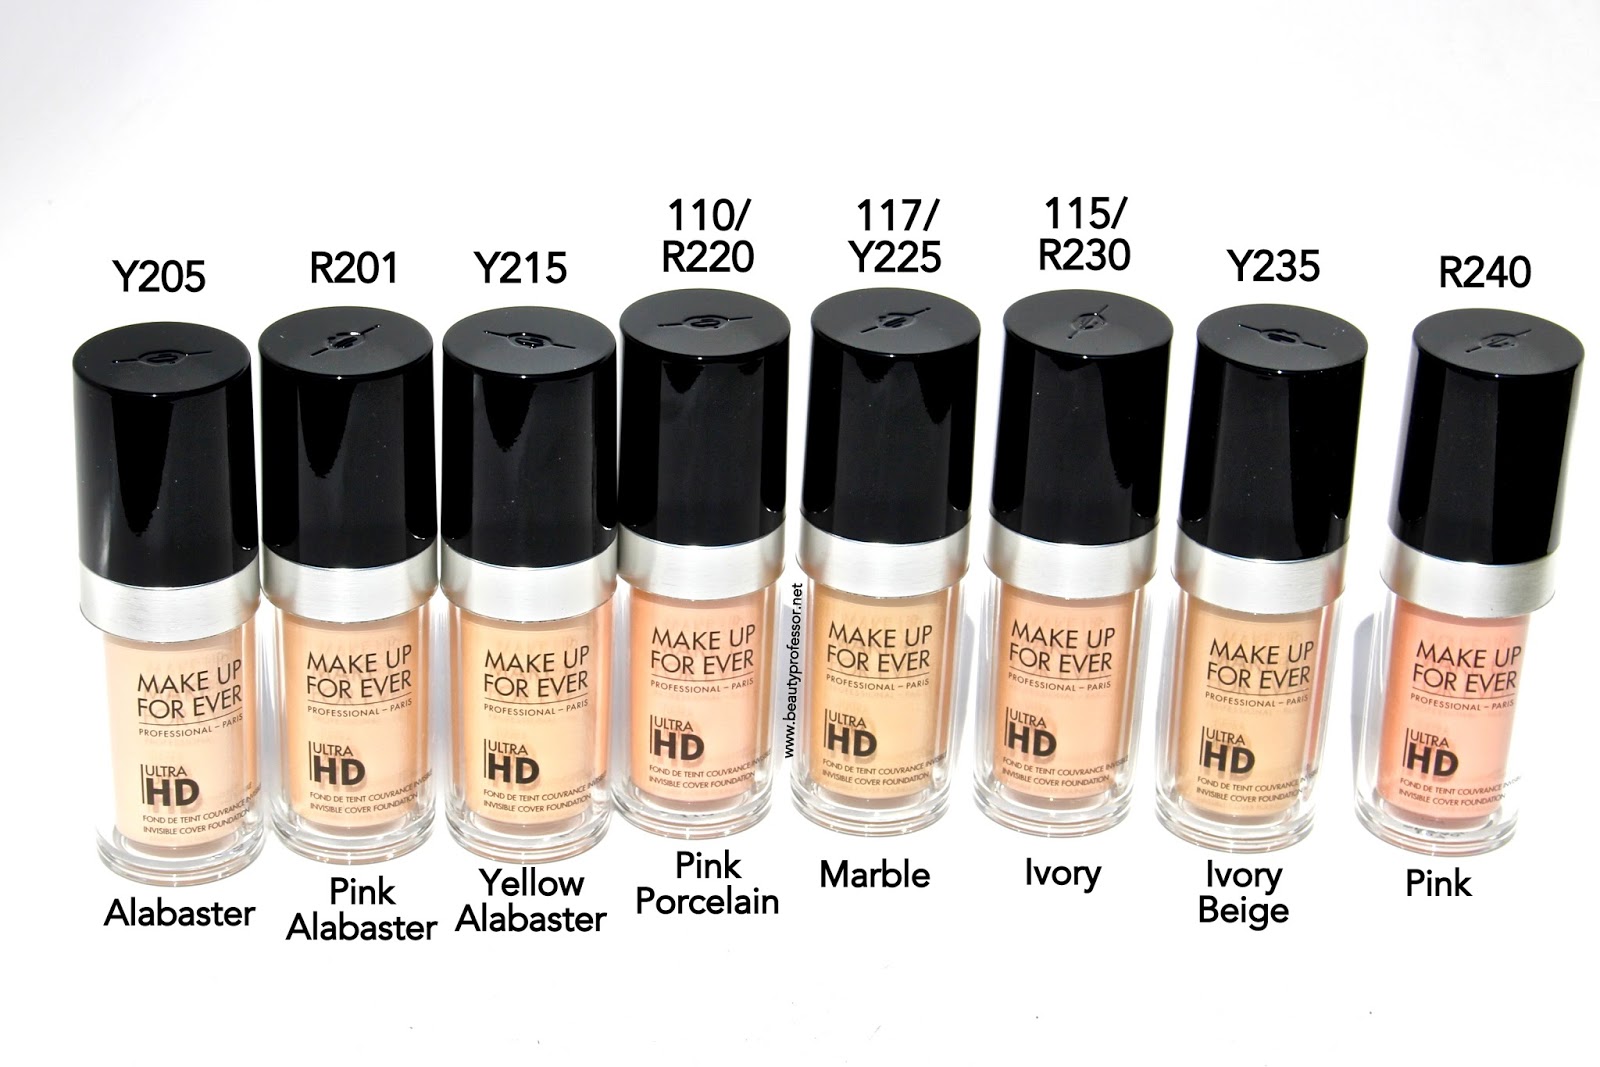 Makeup forever ultra hd foundation colours